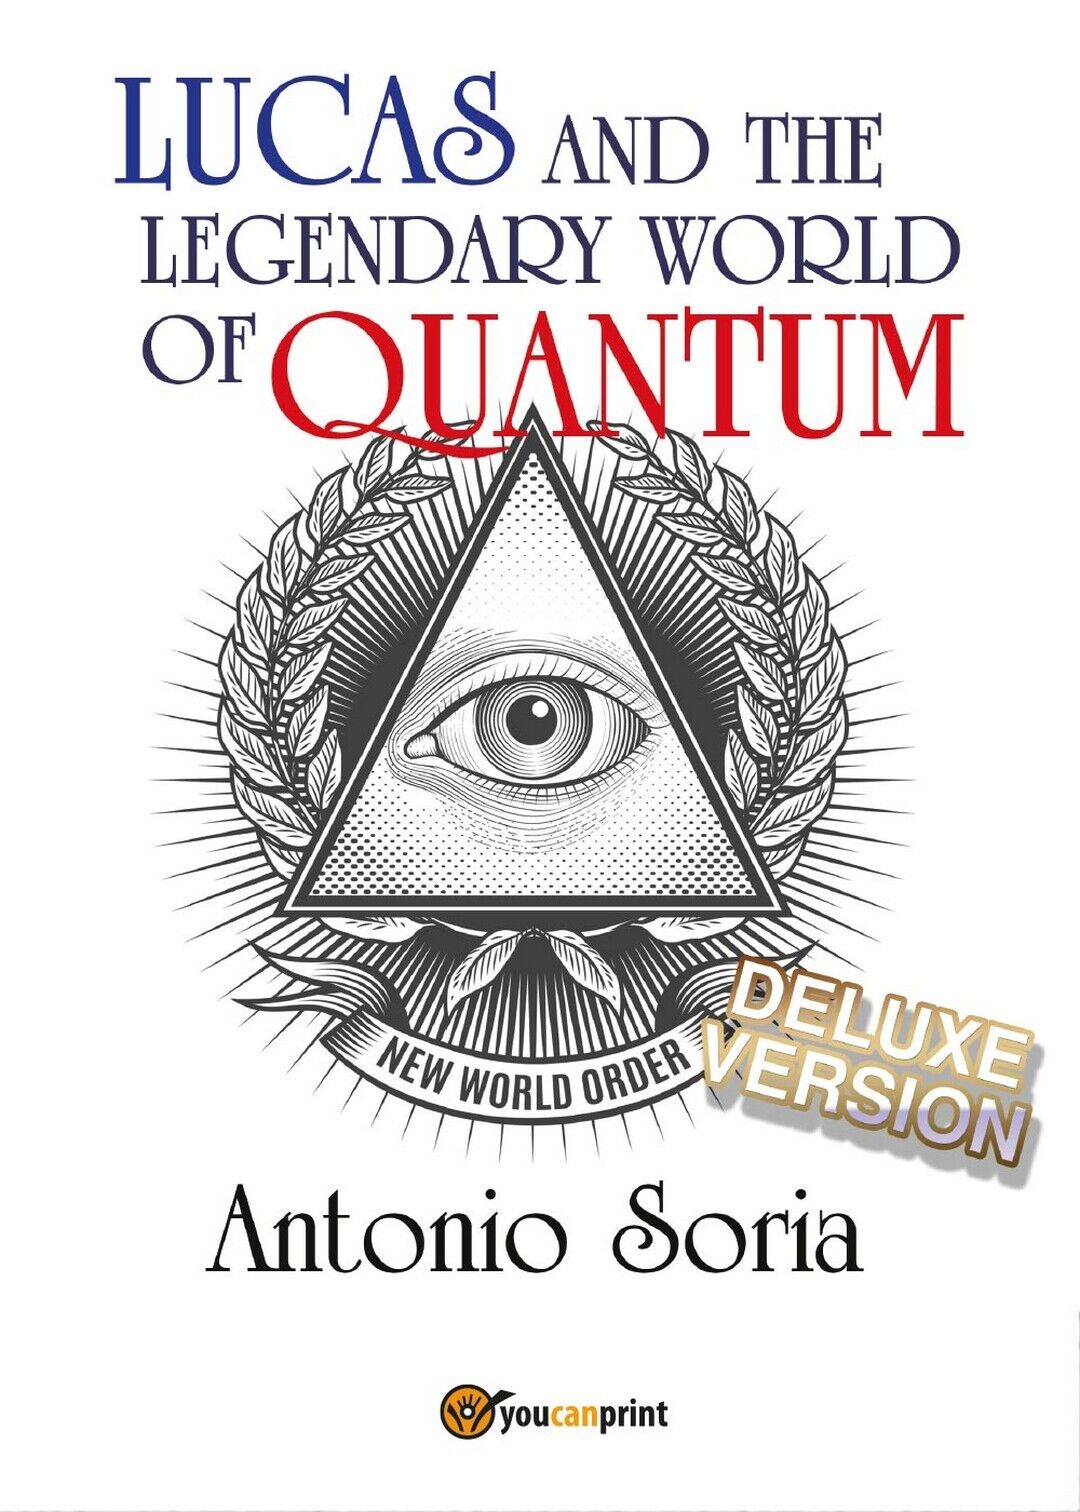 Lucas and the legendary world of Quantum (Deluxe version) Pocket Edition  libro usato